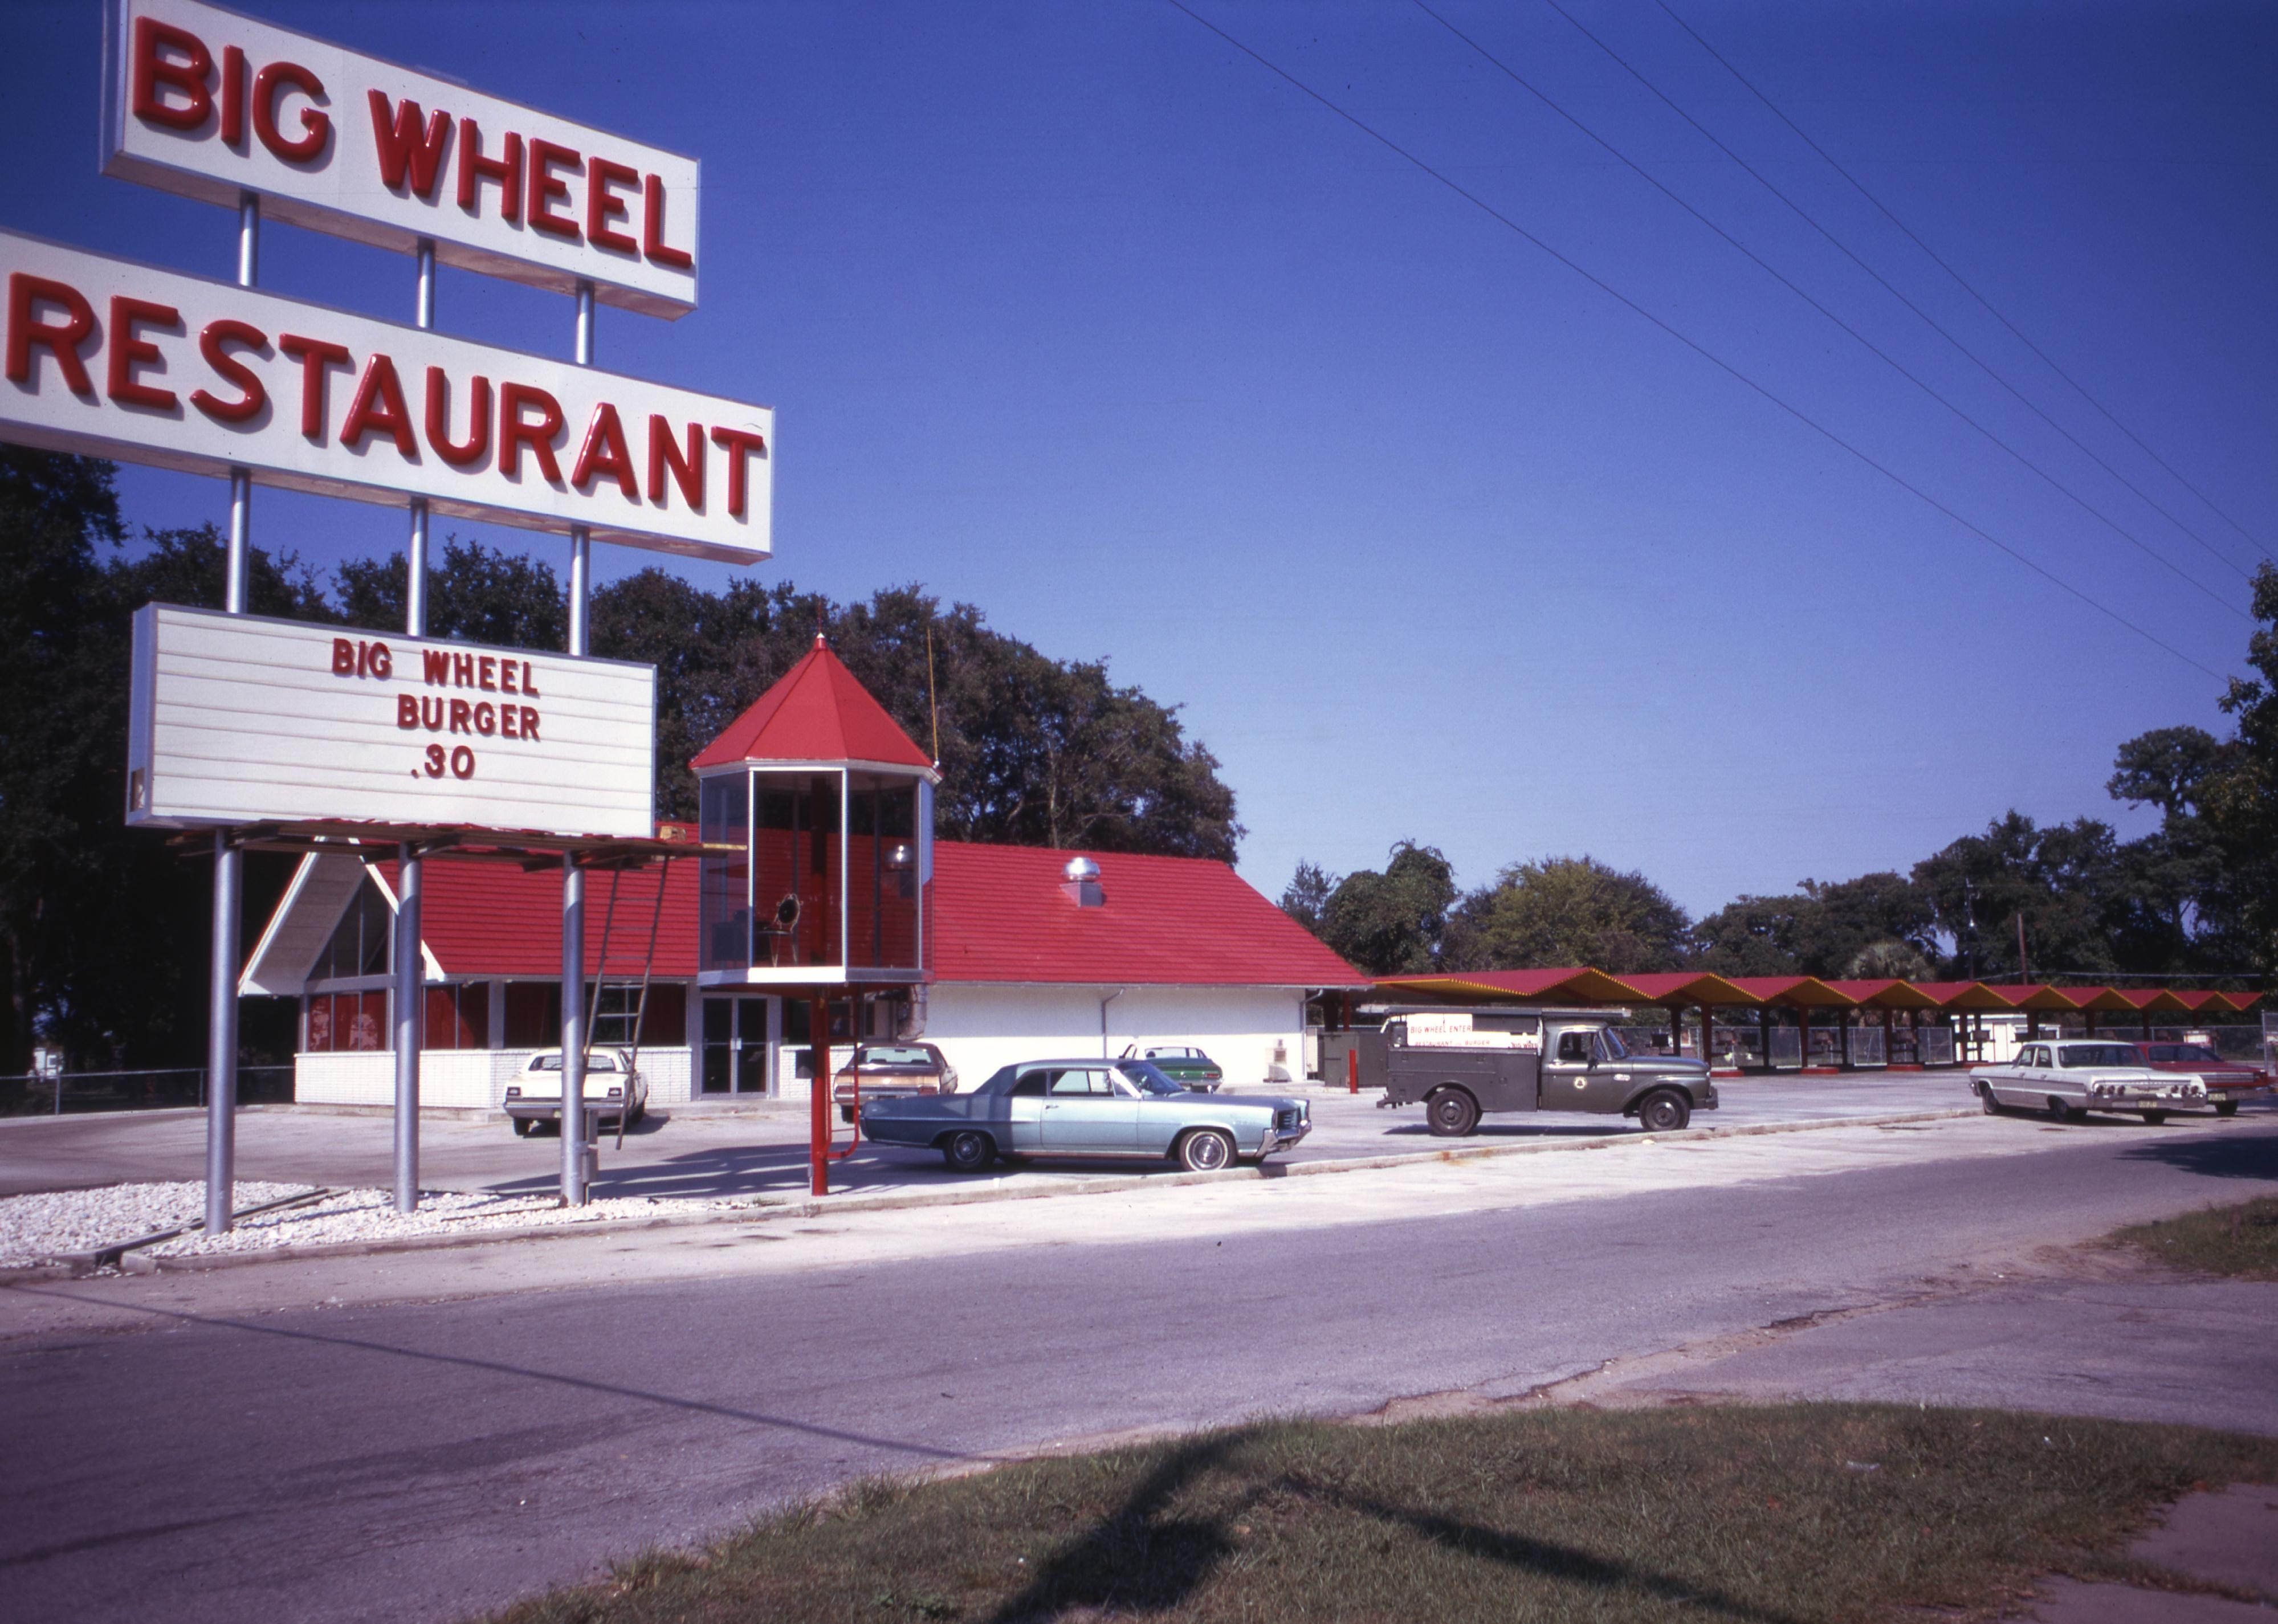 Cars parked outside of a Big Wheel Restaurant with a sign for Big Wheel Burgers for 30 cents, 1971.